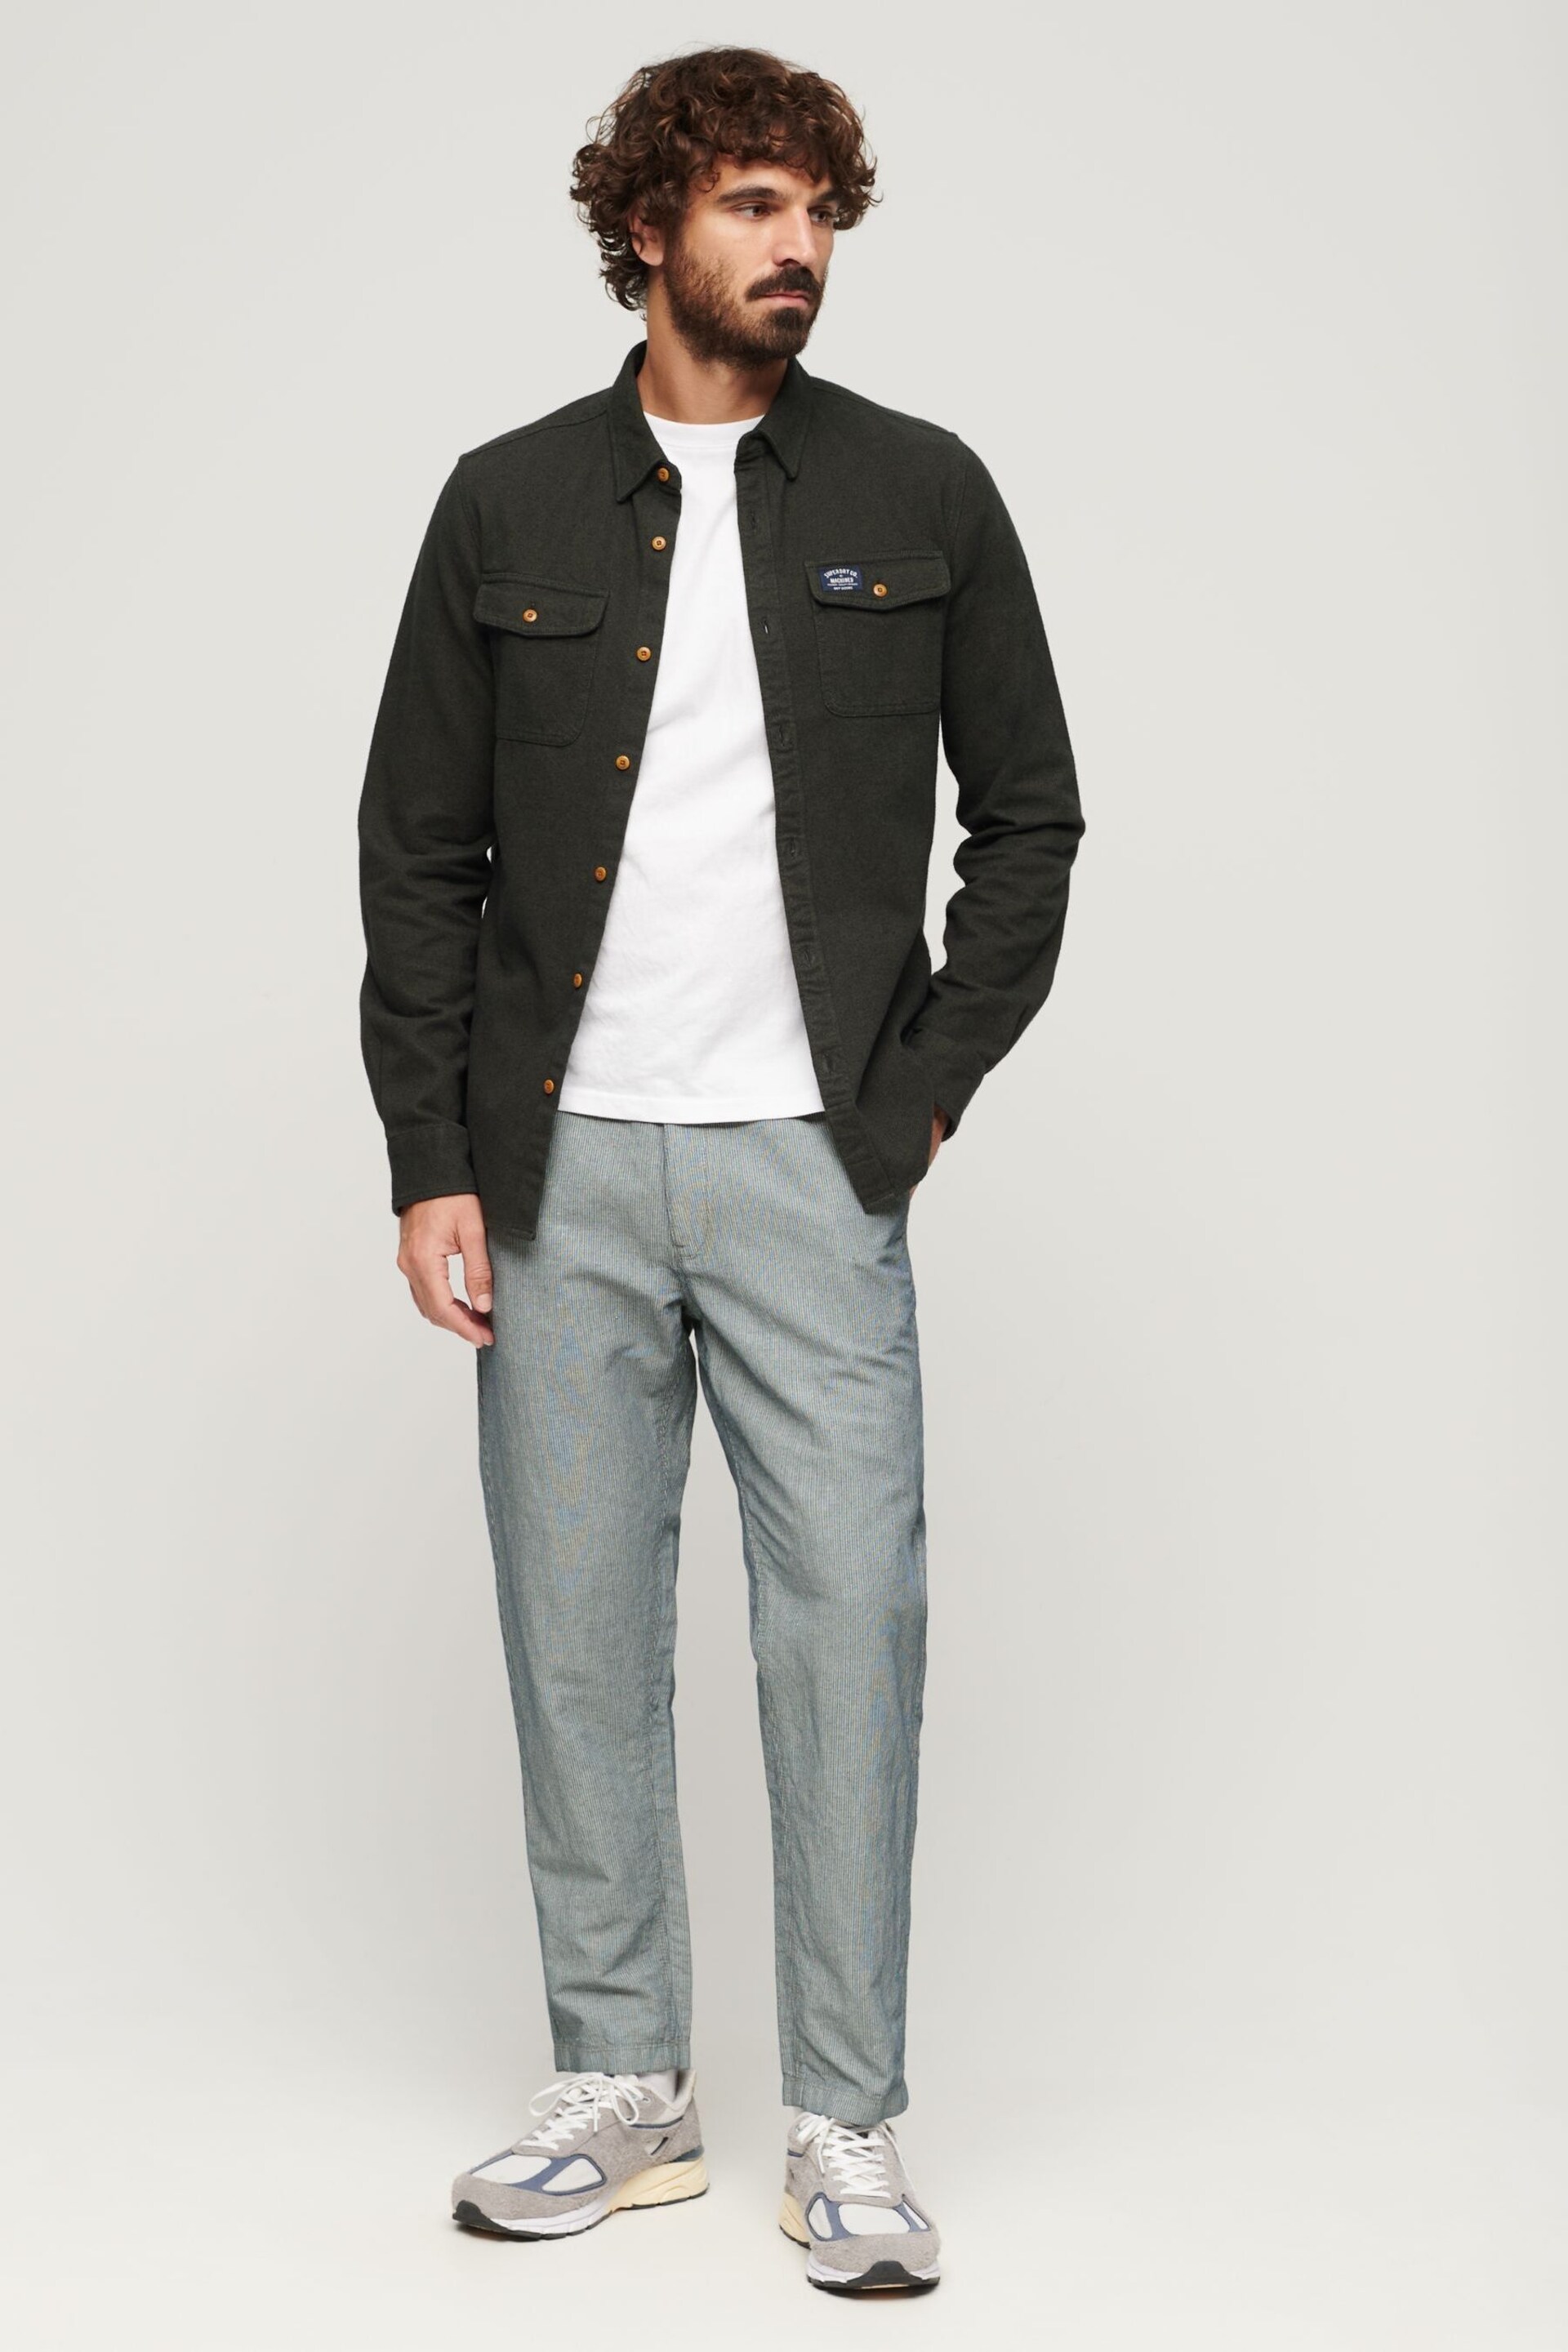 Superdry Grey Drawstring Linen Trousers - Image 3 of 5